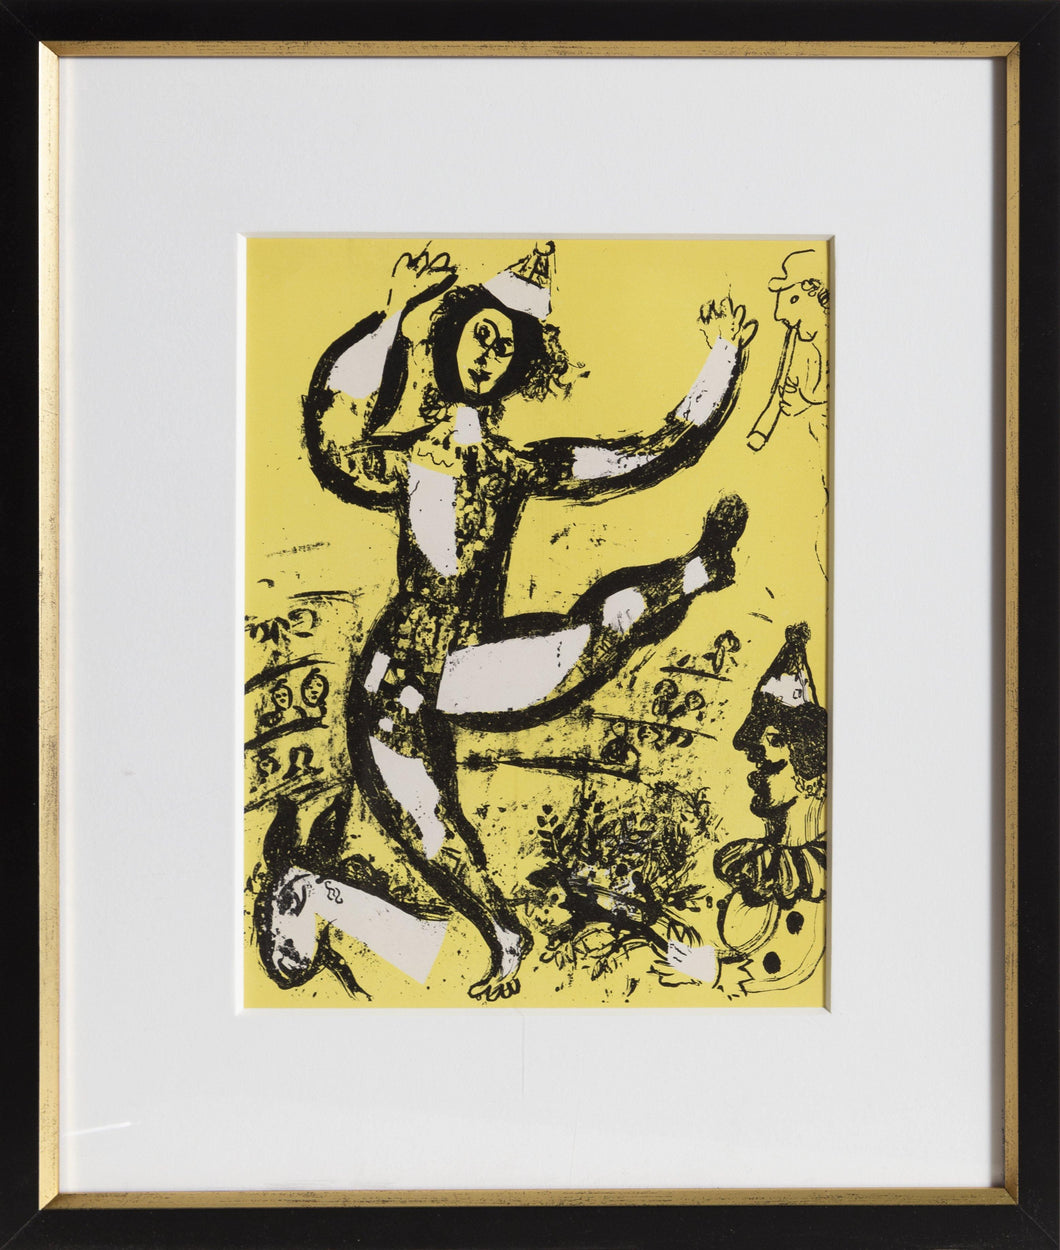 The Circus Lithograph | Marc Chagall,{{product.type}}